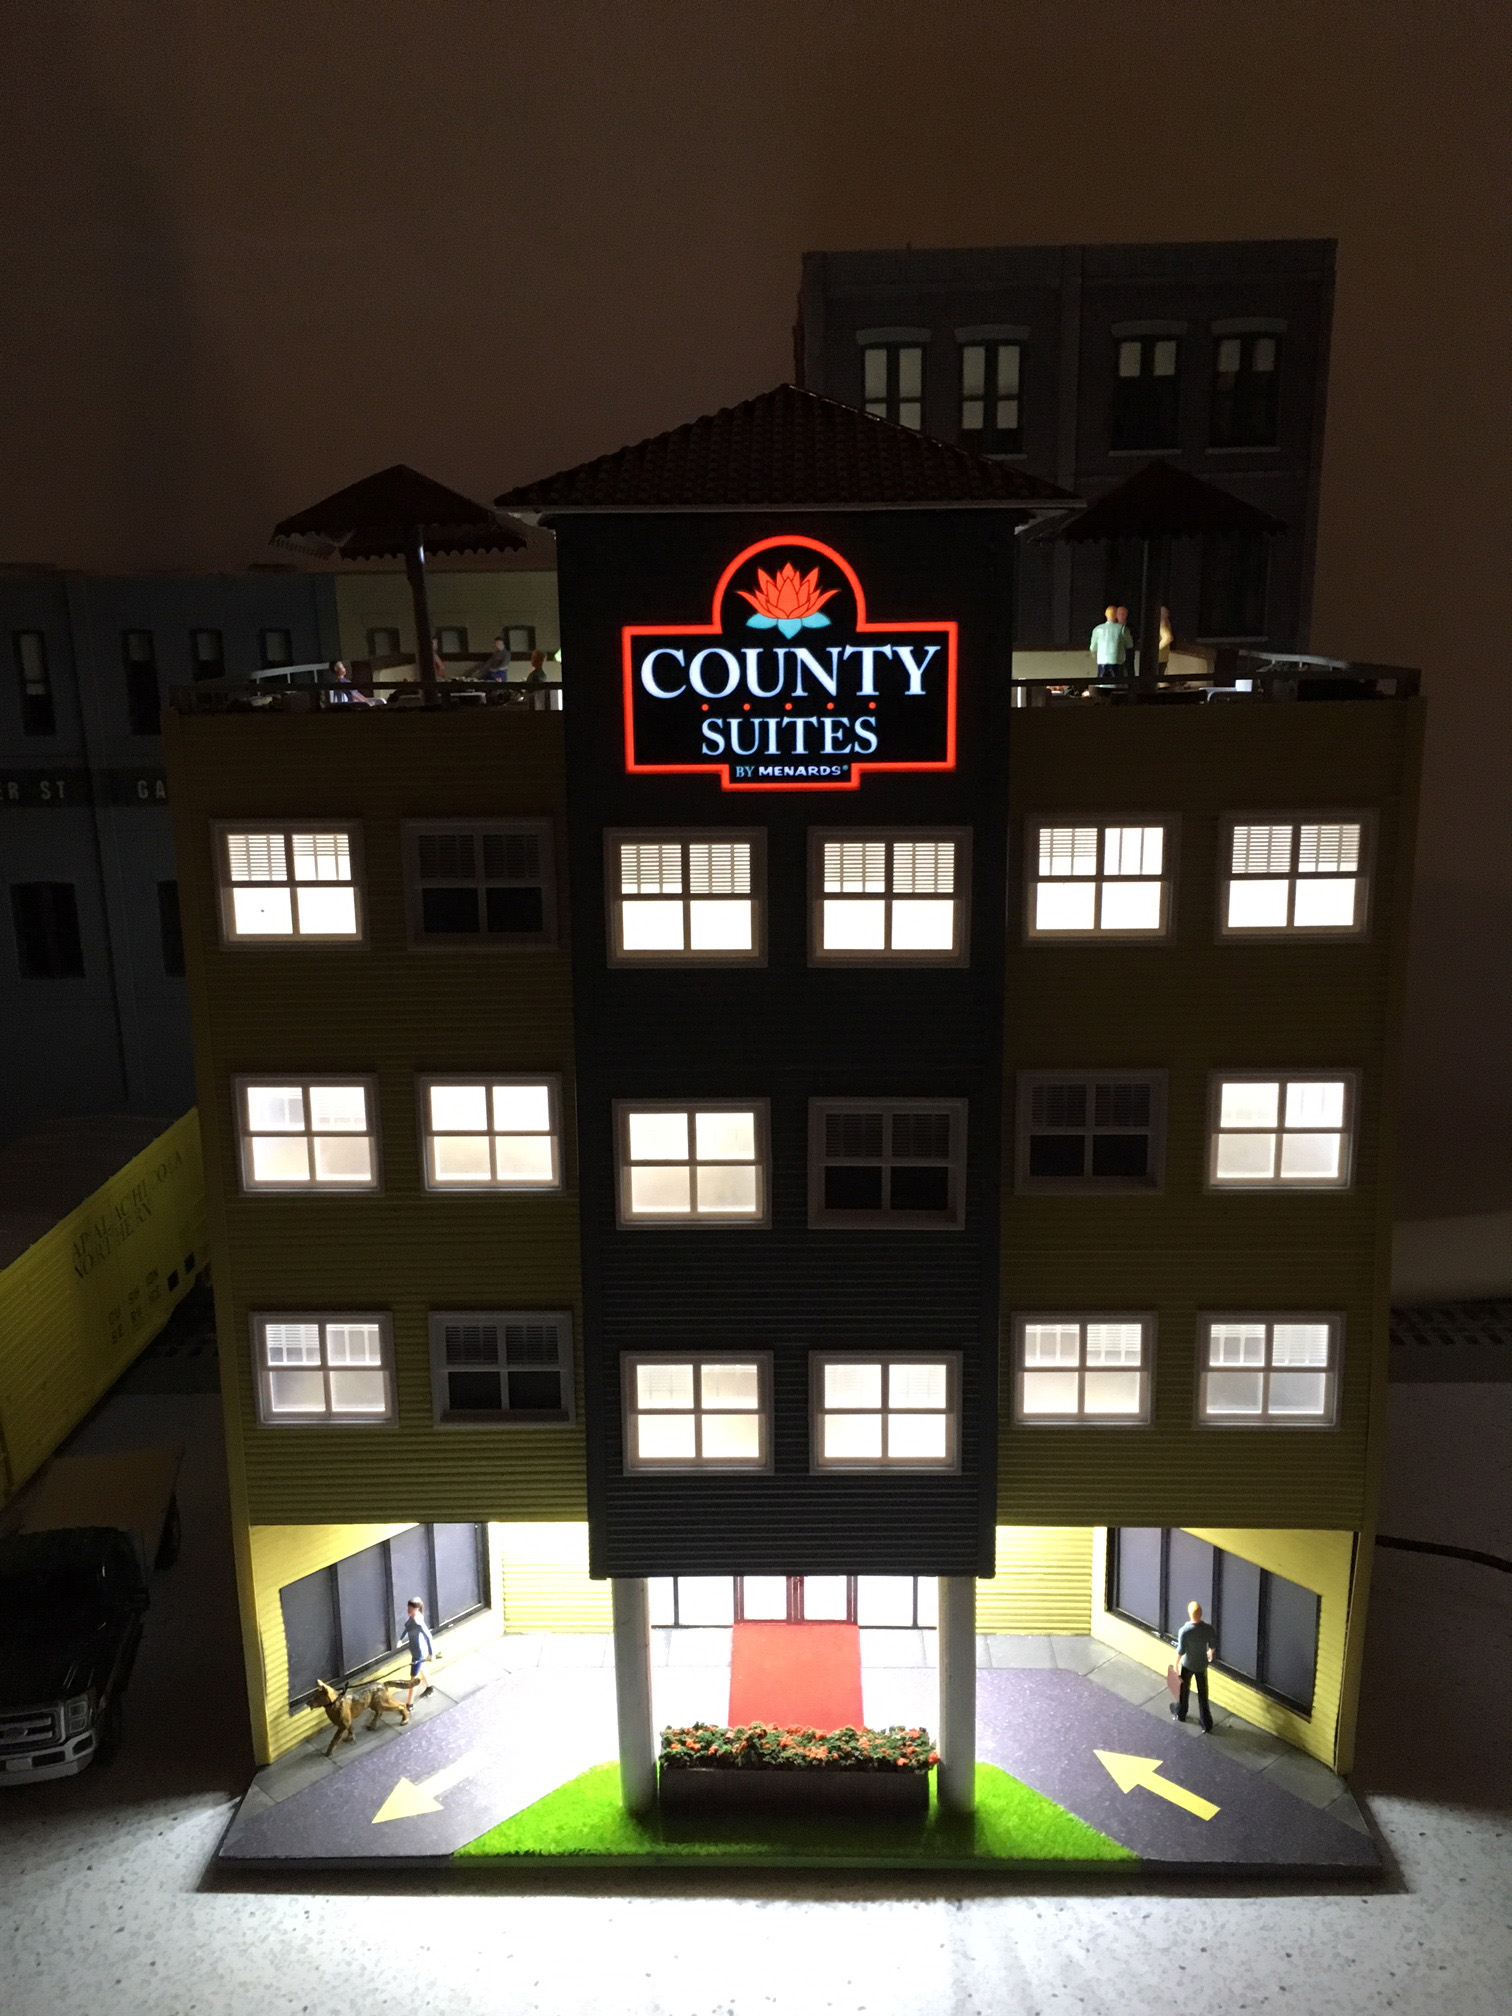 Menards Couty Suites Inn Hotel Train layout Building lighted led O Gauge 